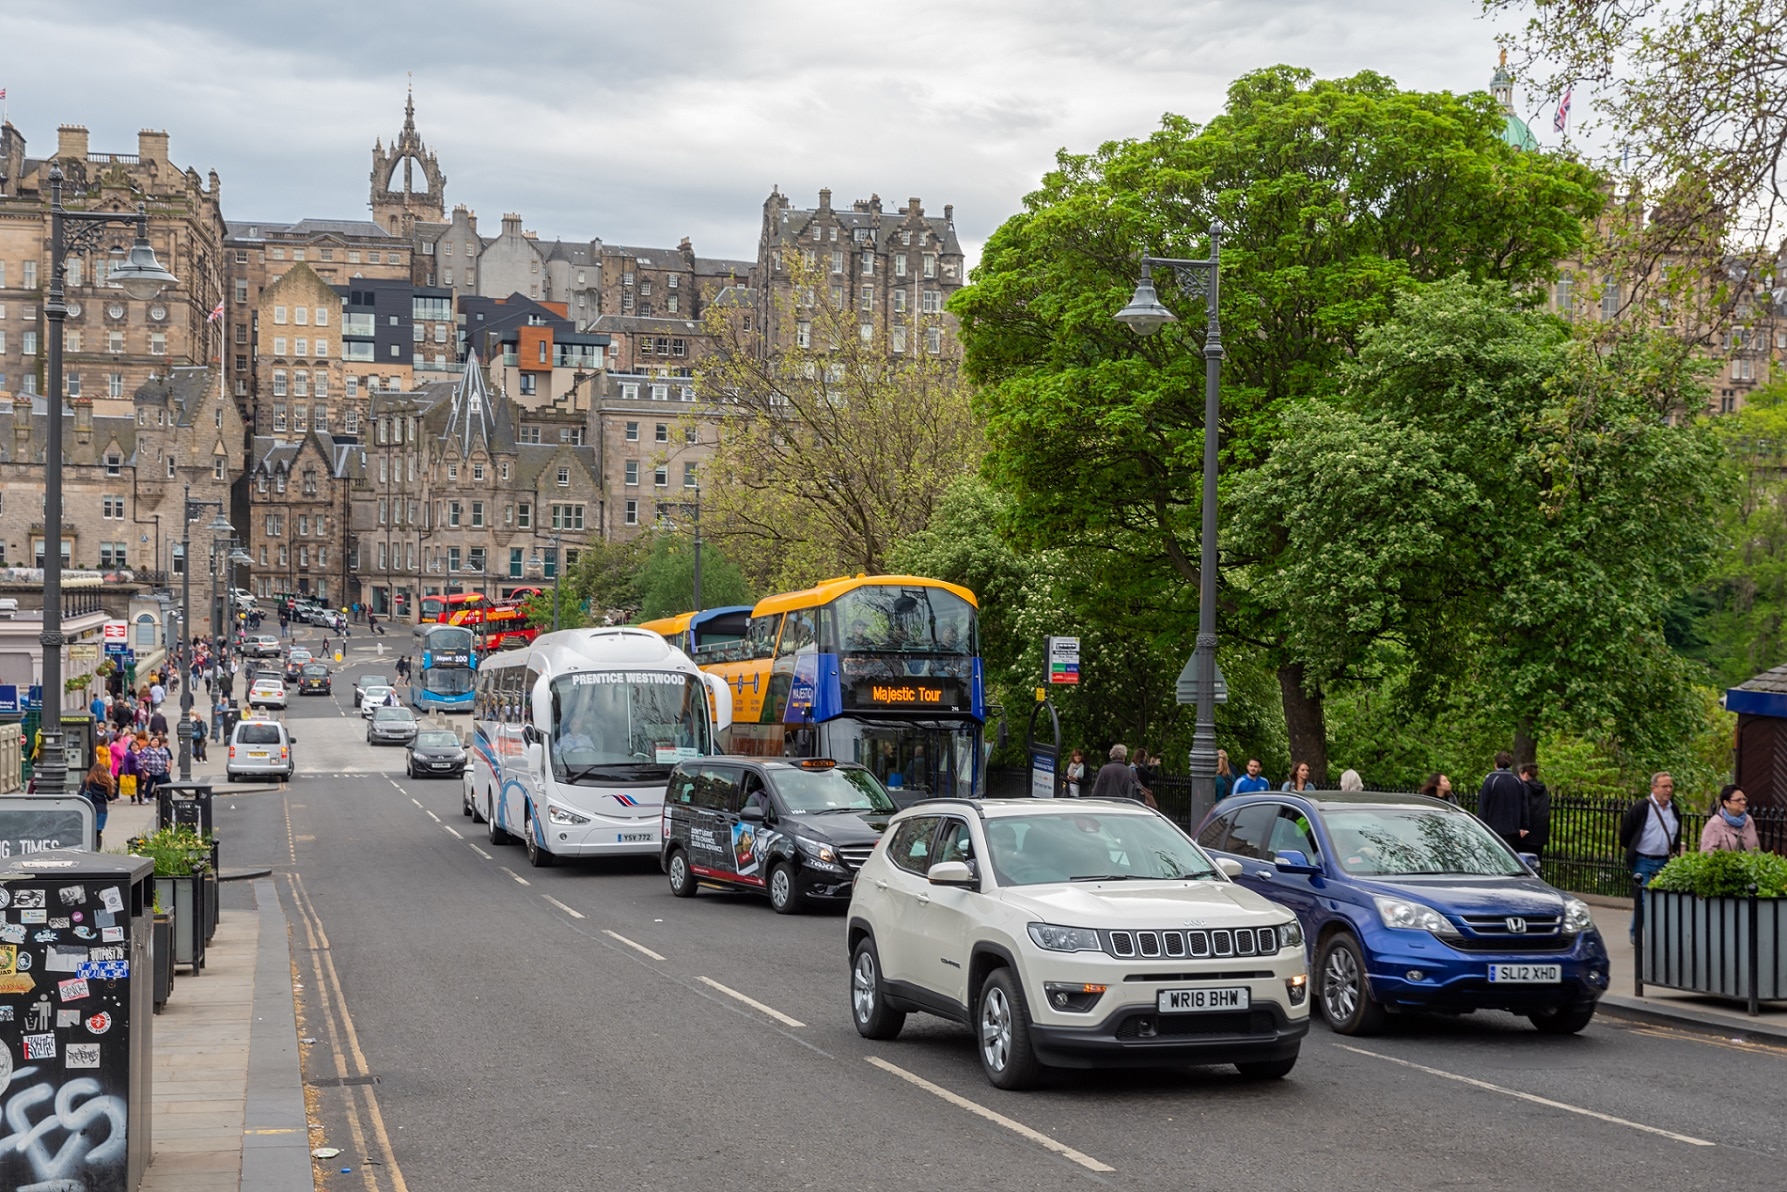 Scottish Low Emission Zones are introduced without enforcement